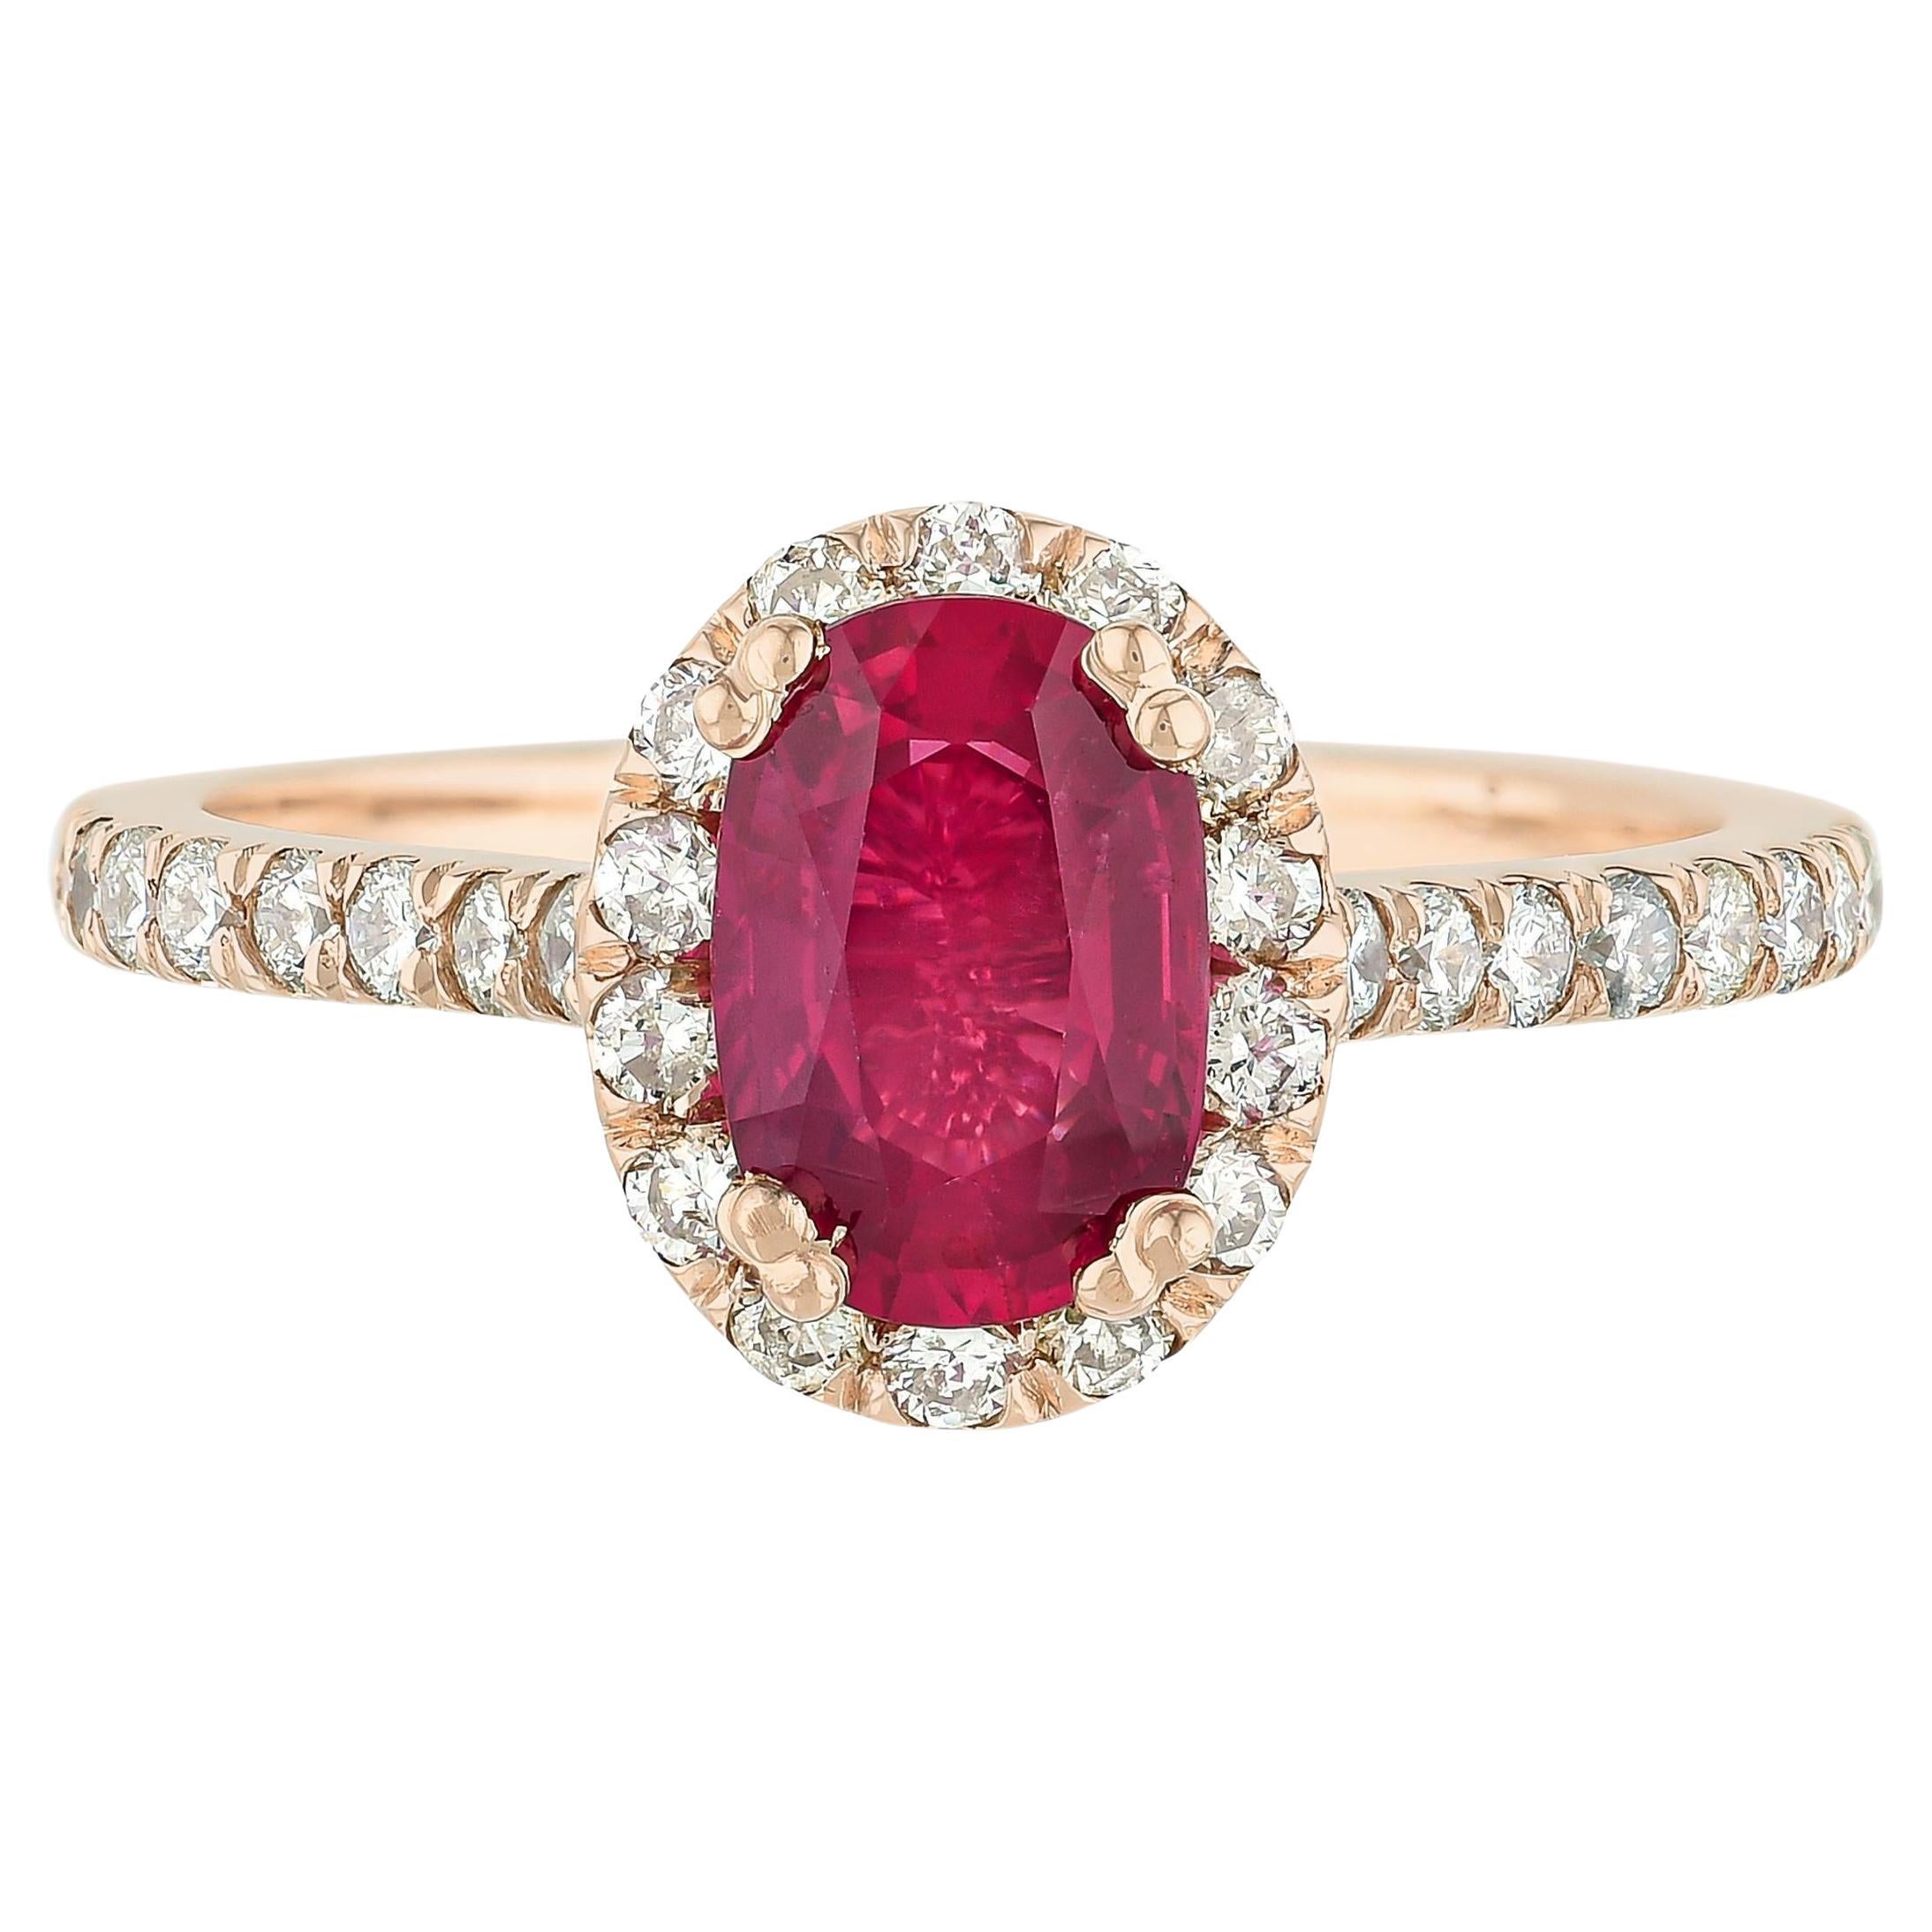 GIA Certified 1.10 Carat Natural Unheated Ruby Ring Set with Diamonds